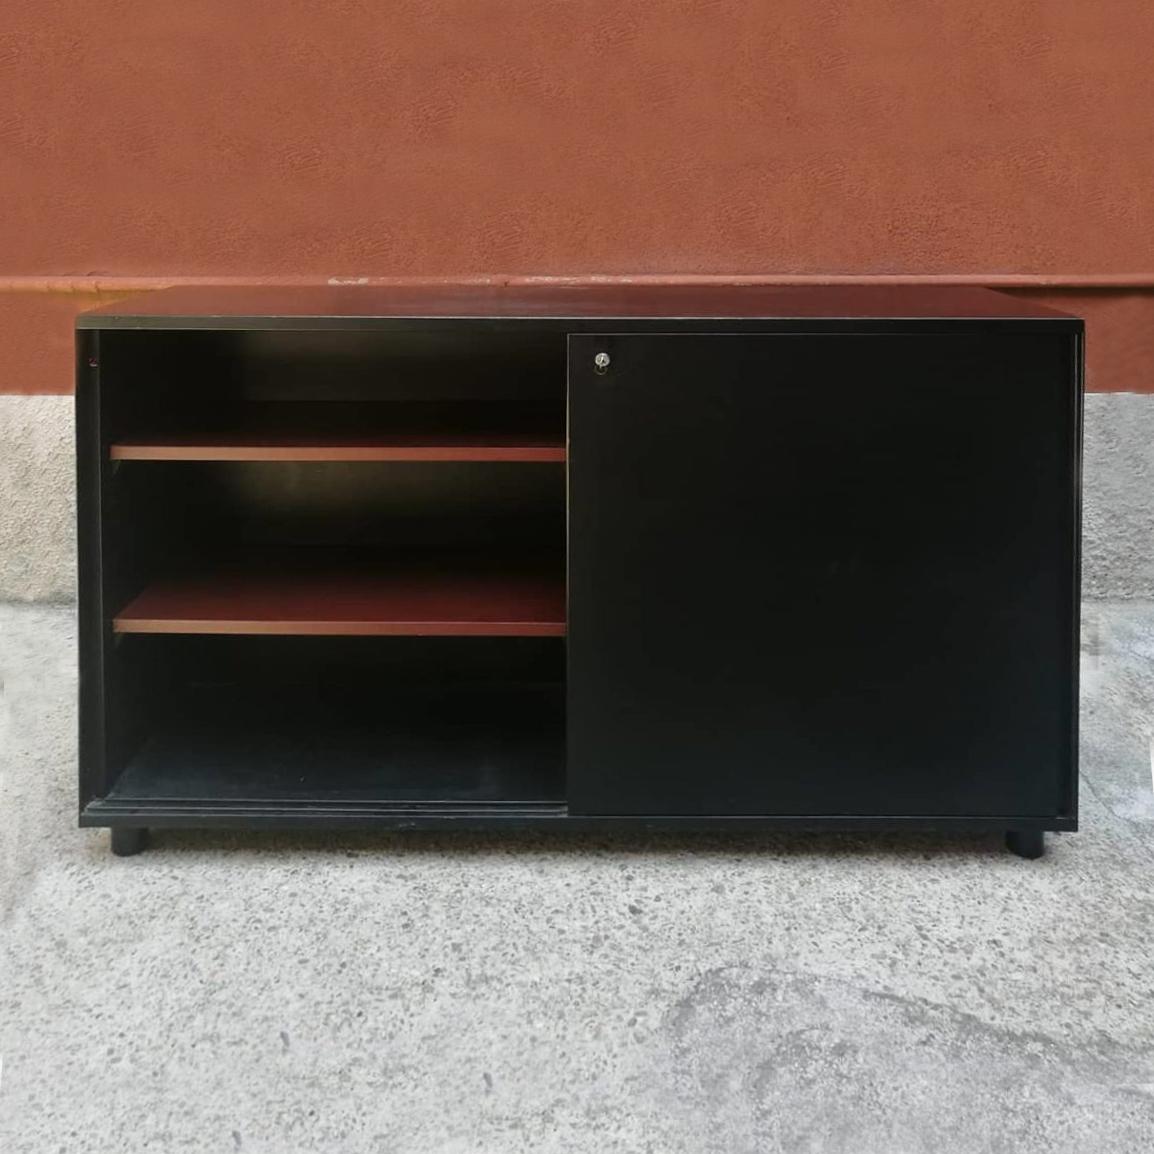 Italian vintage black metal cabinet by Osvaldo Borsani for Tecno, 1970s
Black painted metal cabinet from 1970s, with sliding doors and 4 internal burgundy shelves.
Produced by Osvaldo Borsani for Tecno.
Excellent general conditions.
Measures: 160x